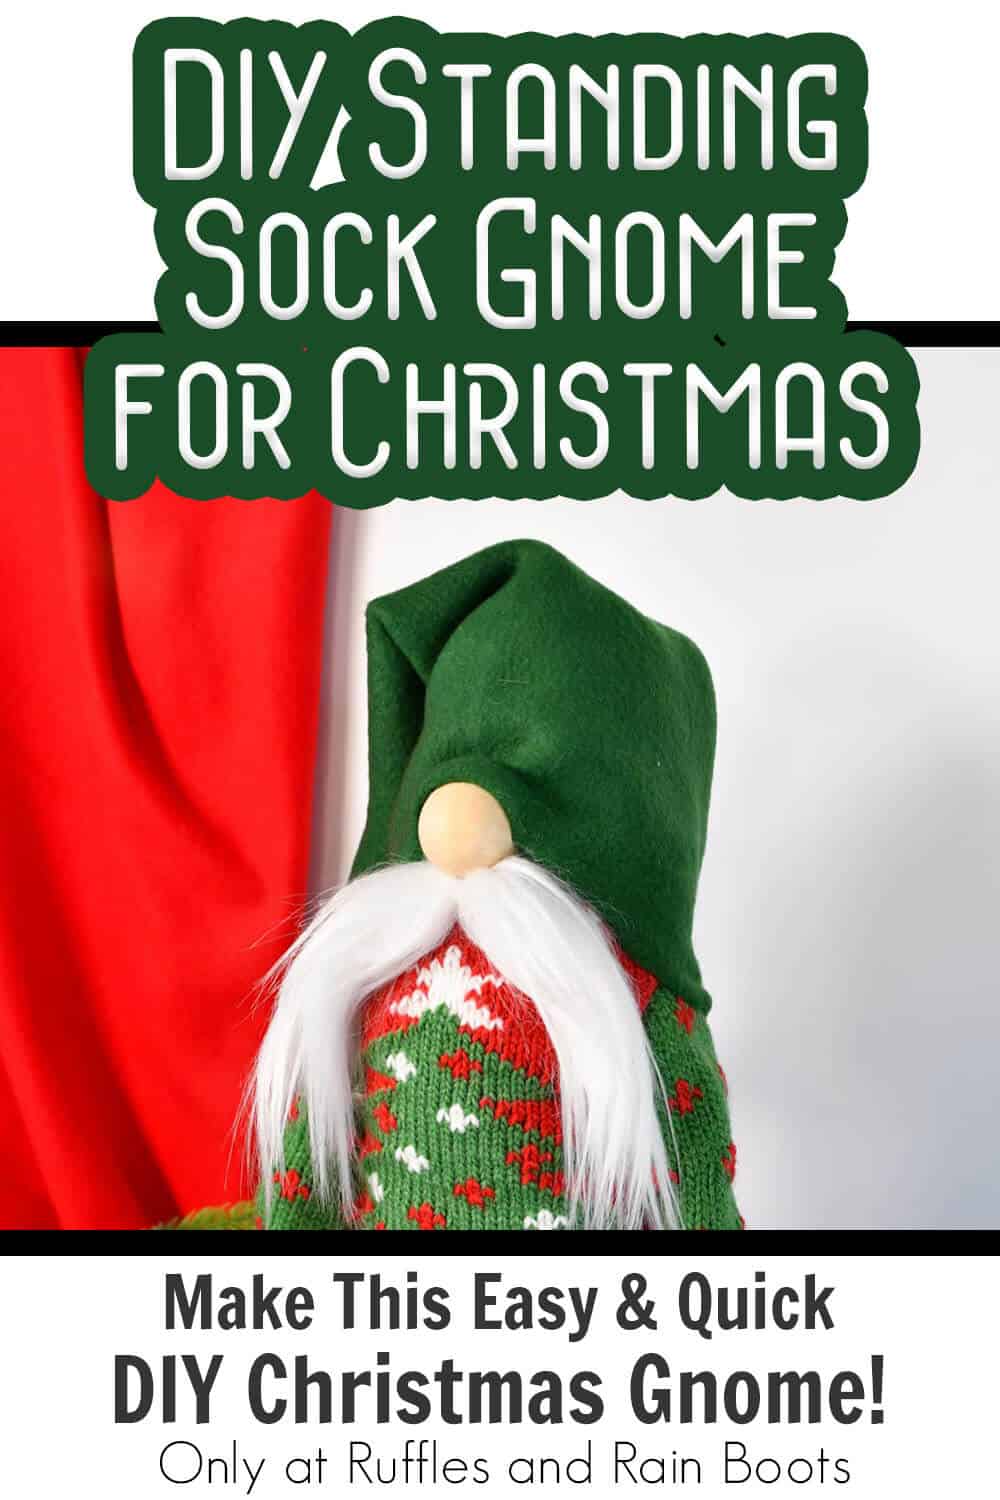 christmas standing gnome from a wine bottle sweater with text which reads diy standing sock gnome for christmas make this easy & quick diy christmas gnome!